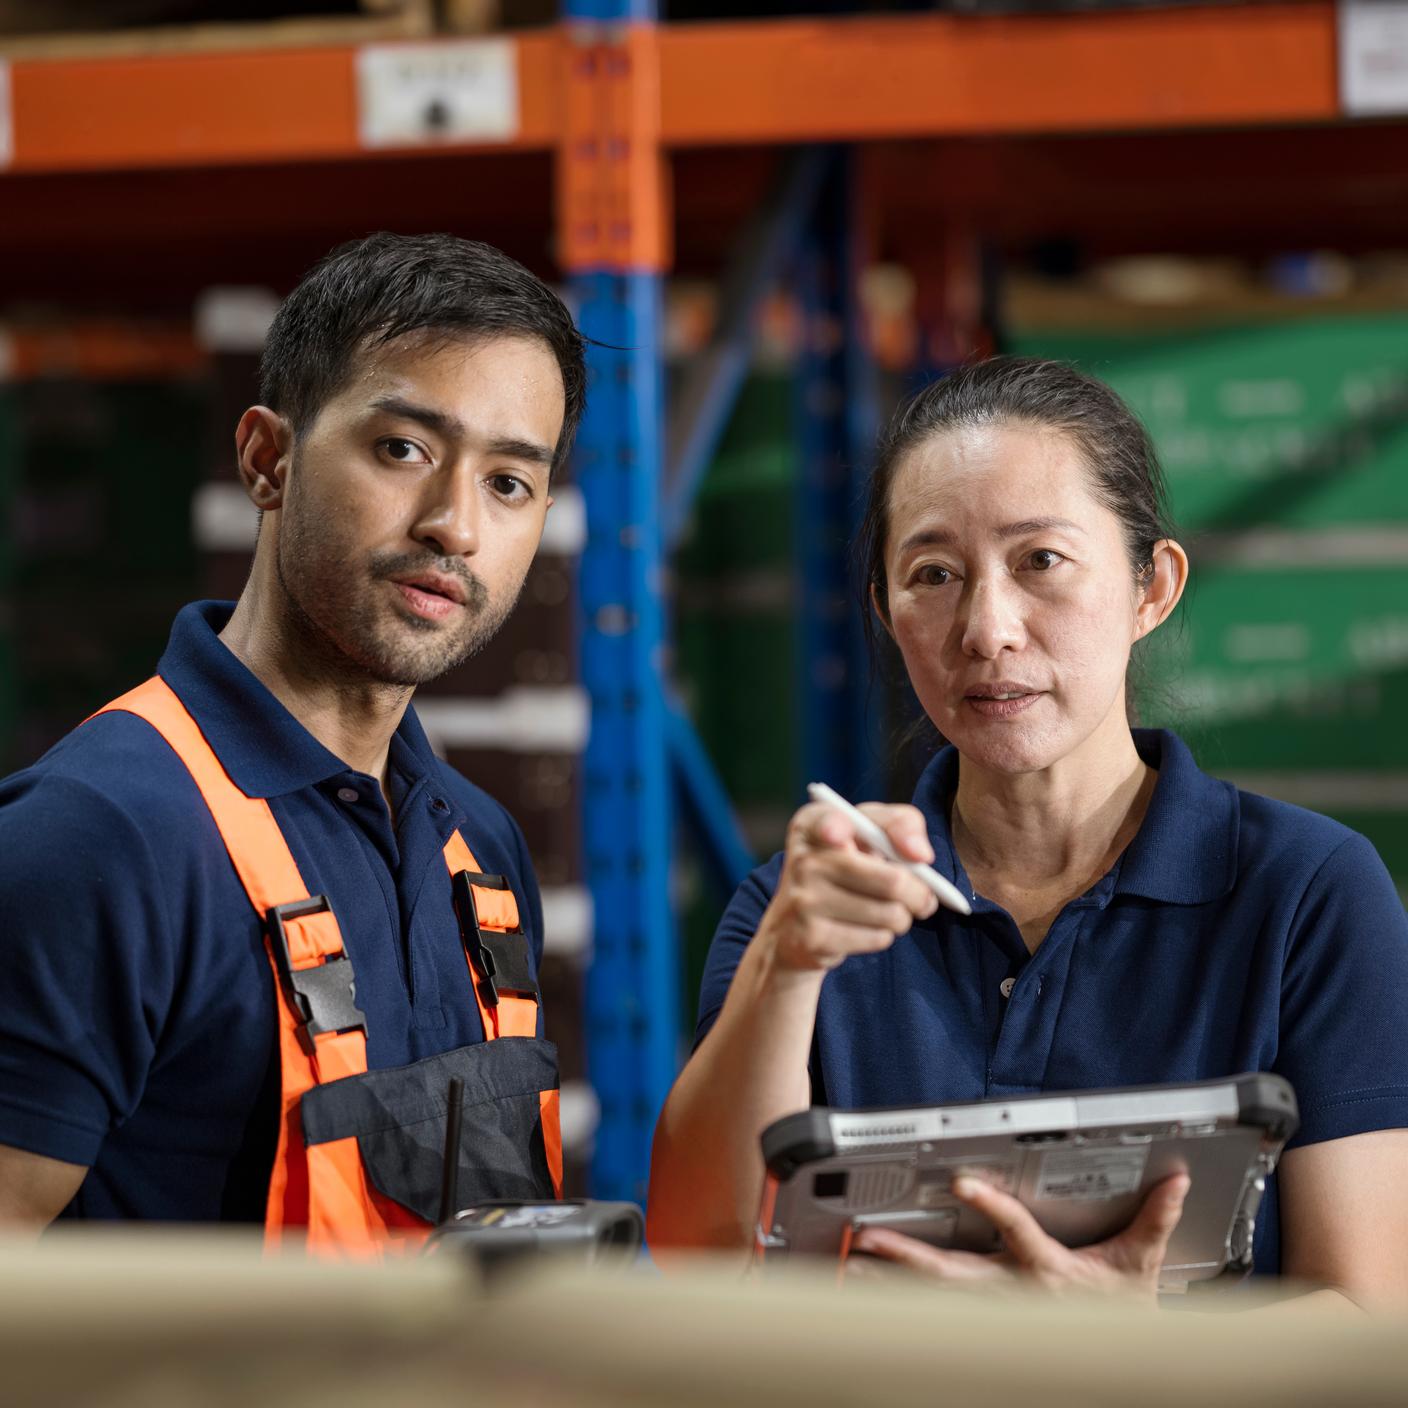 Warehouse manager talking with engineer in warehouse shop floor using tablet 